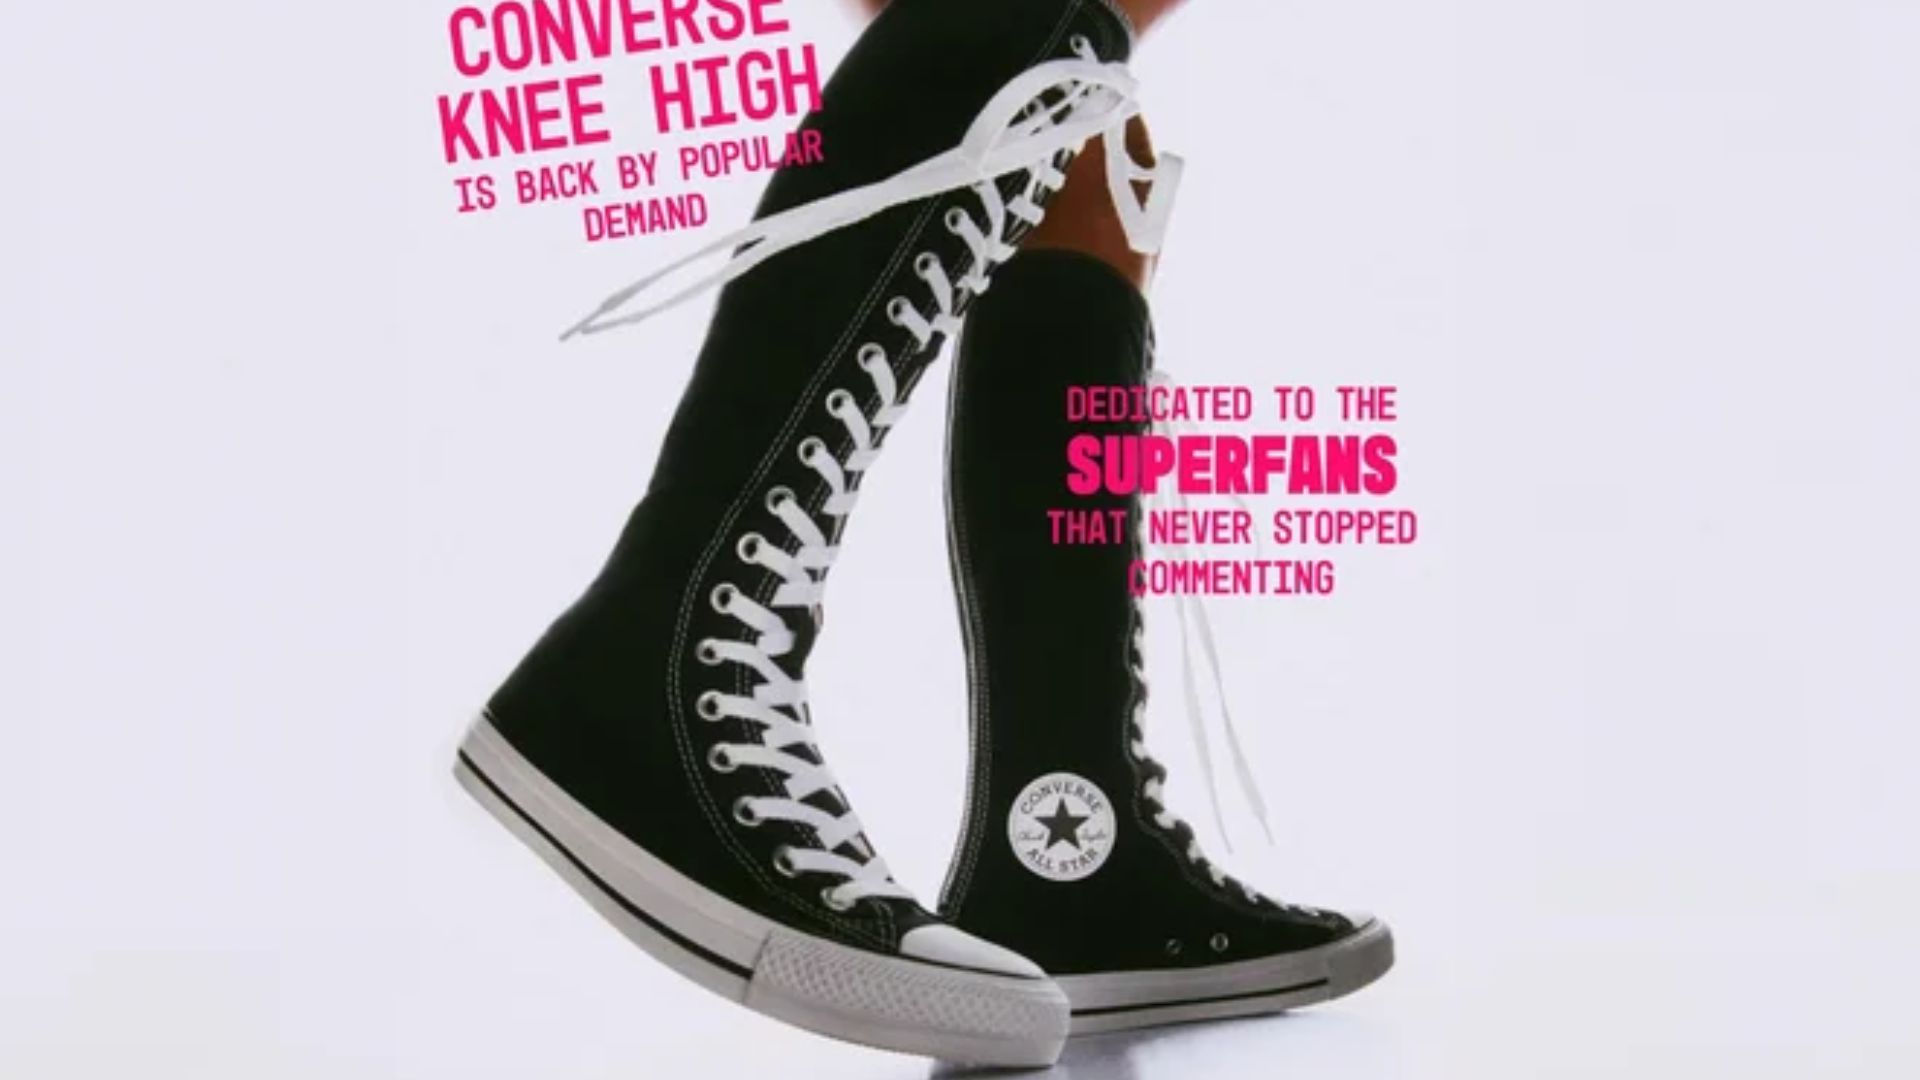 How tiktok comments pushed converse to bring back discontinued sneakers